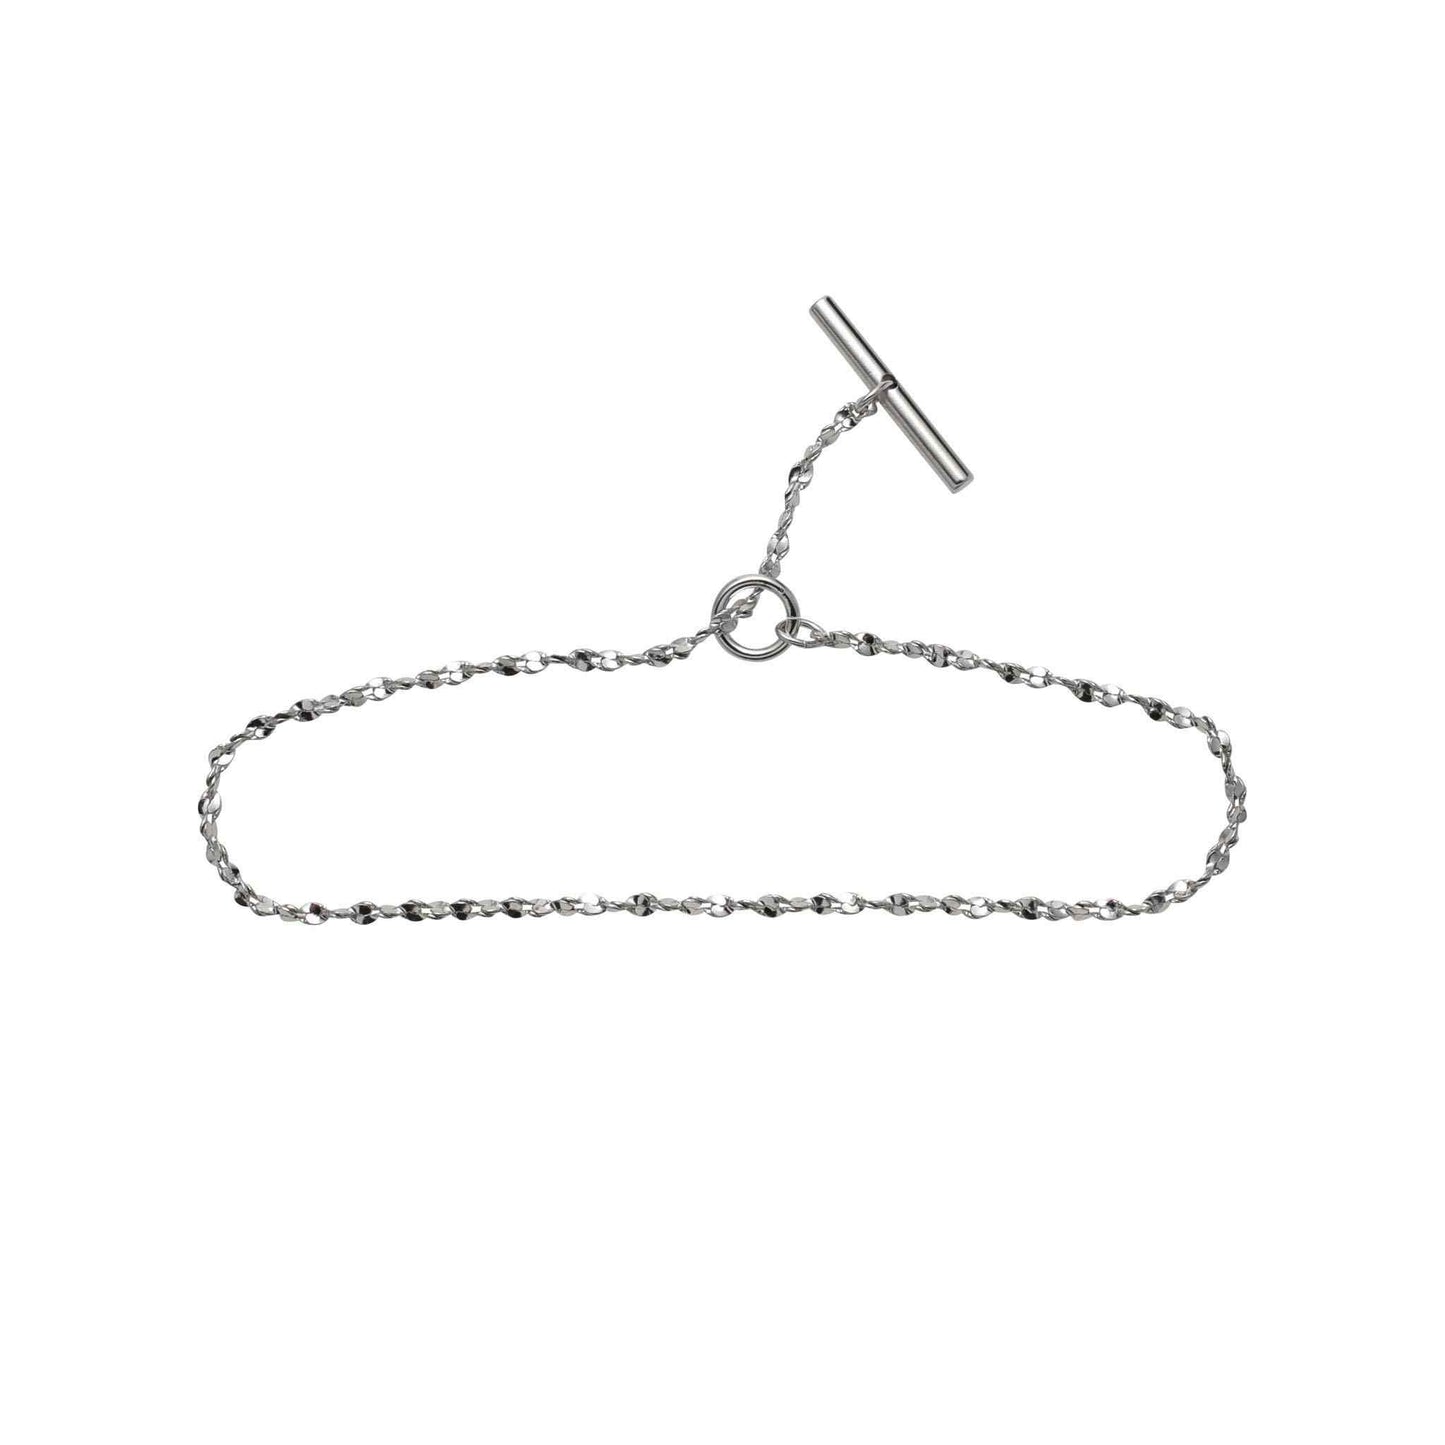 A nugget tie chain displayed on a neutral white background.